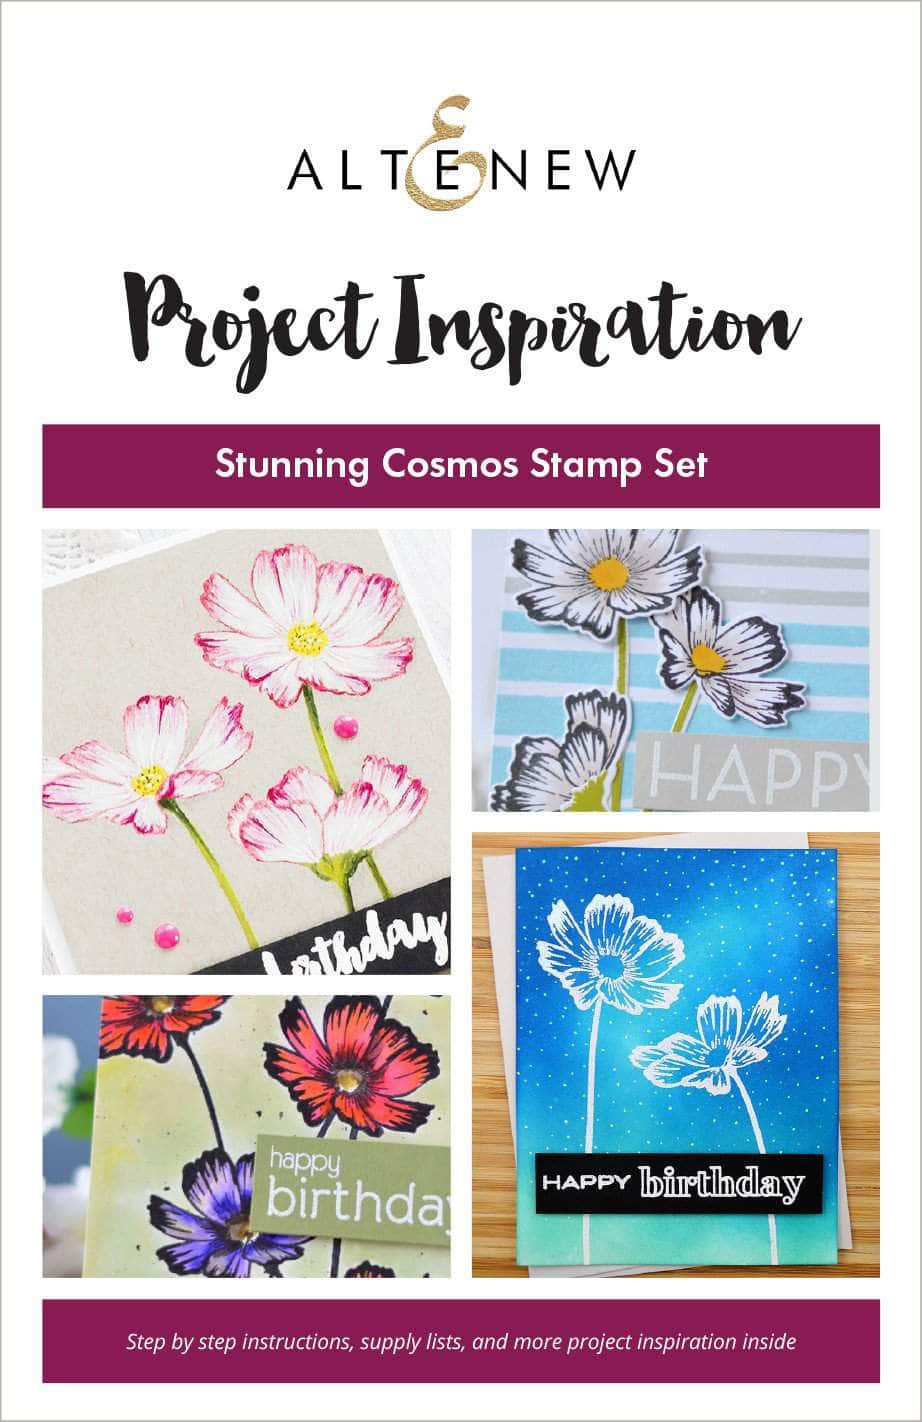 Printed Media Stunning Cosmos Inspiration Guide